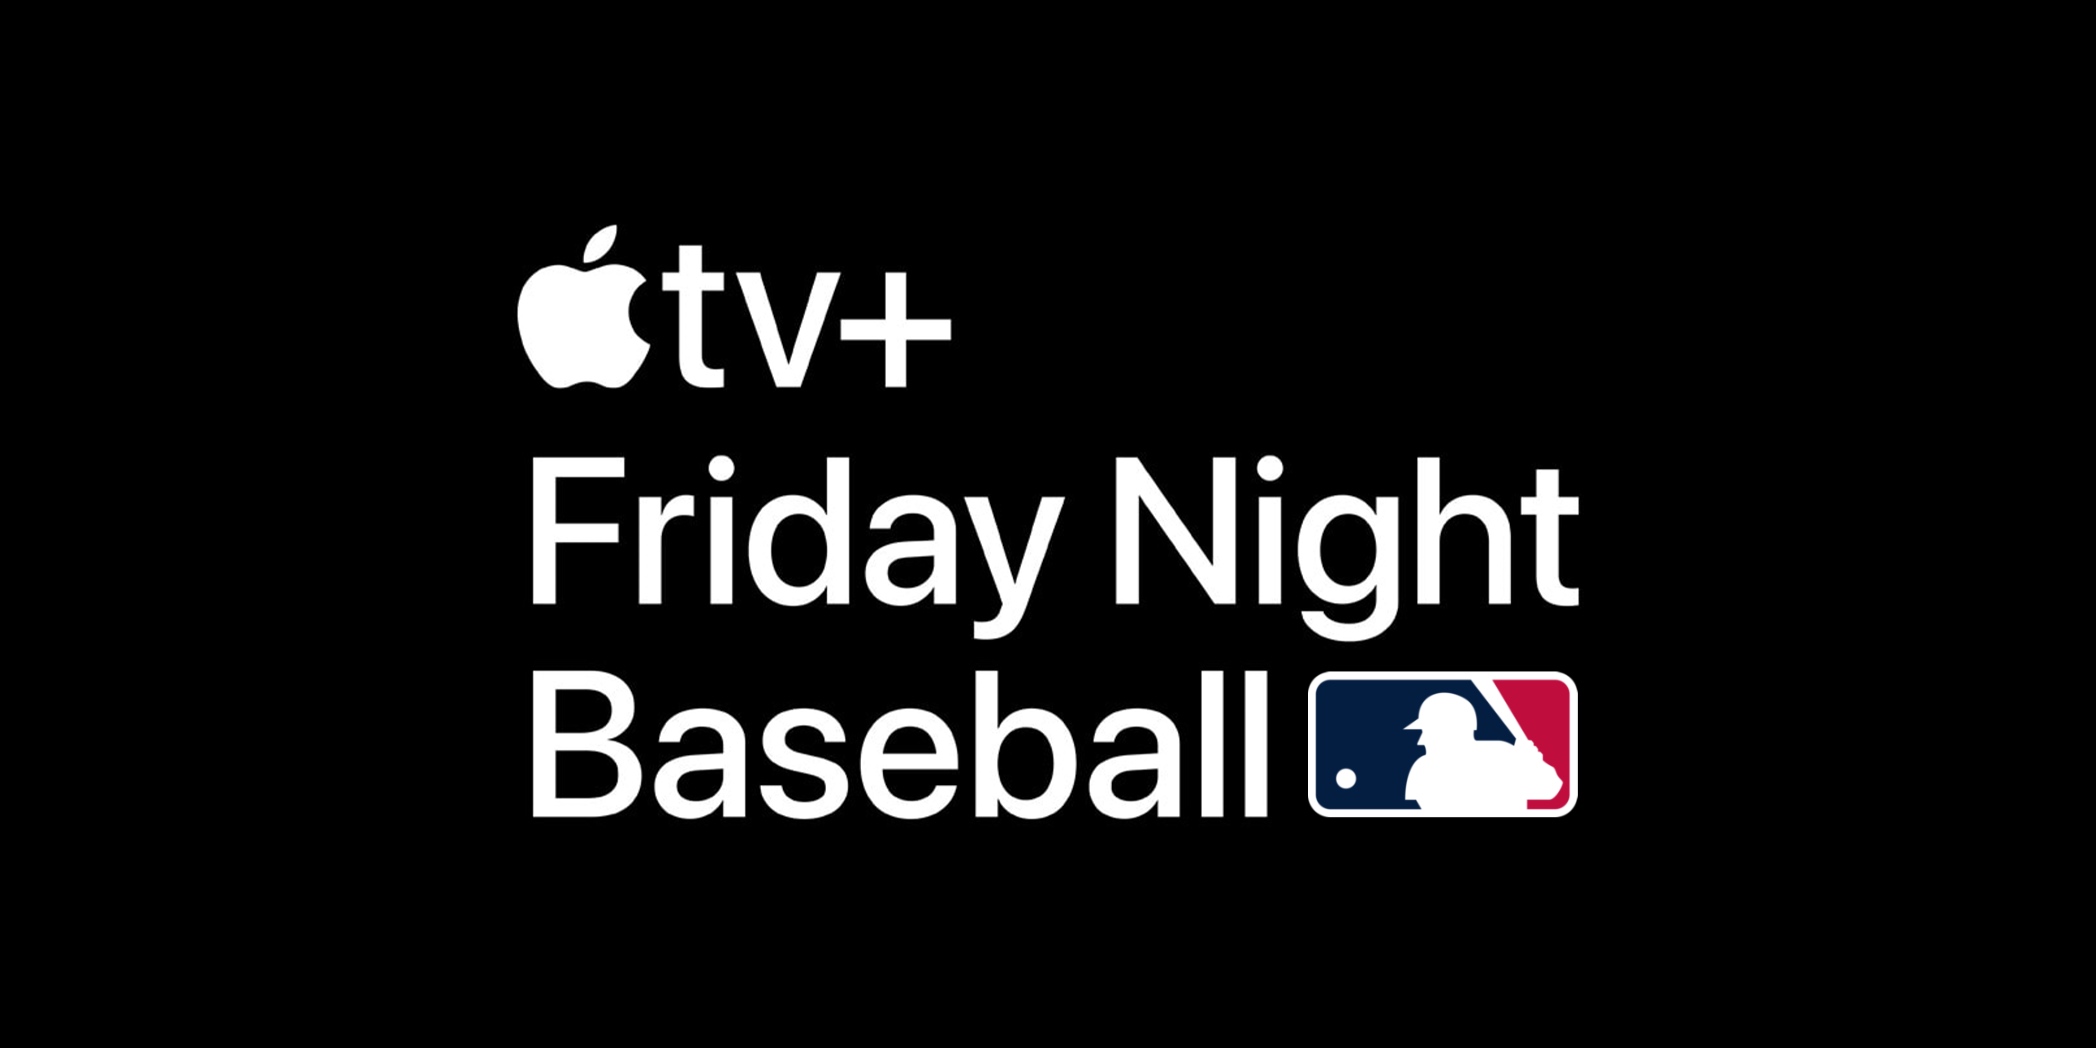 How to stream Major League Baseball on Roku devices guest post